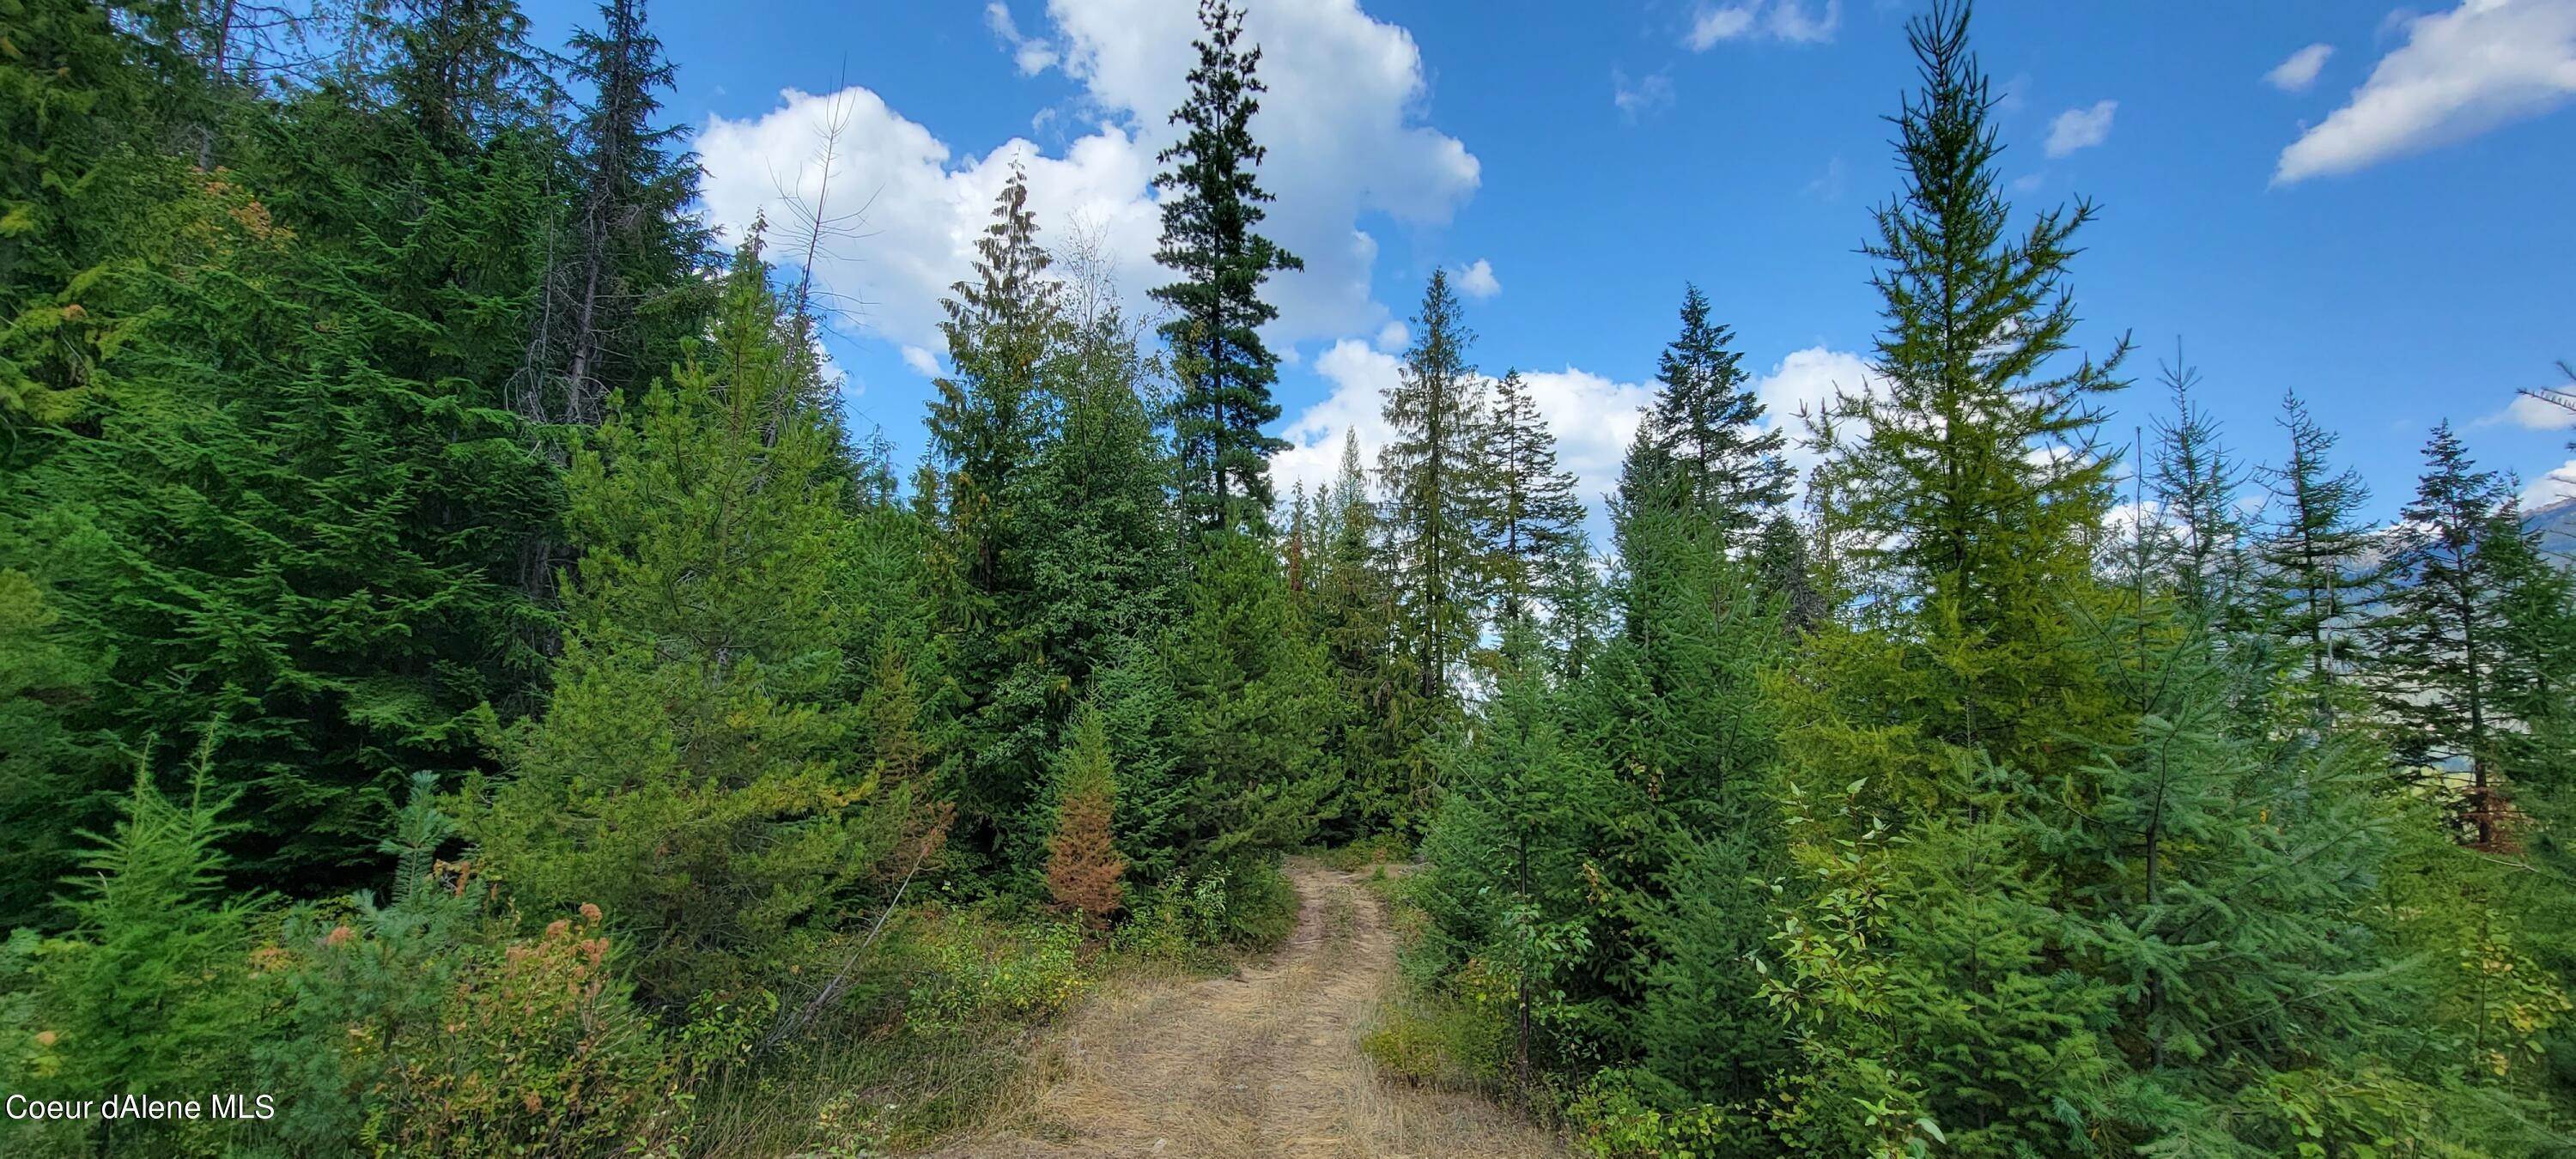 5. Land for Sale at NNA Enchanted Lane Tract 5 Bonners Ferry, Idaho 83805 United States